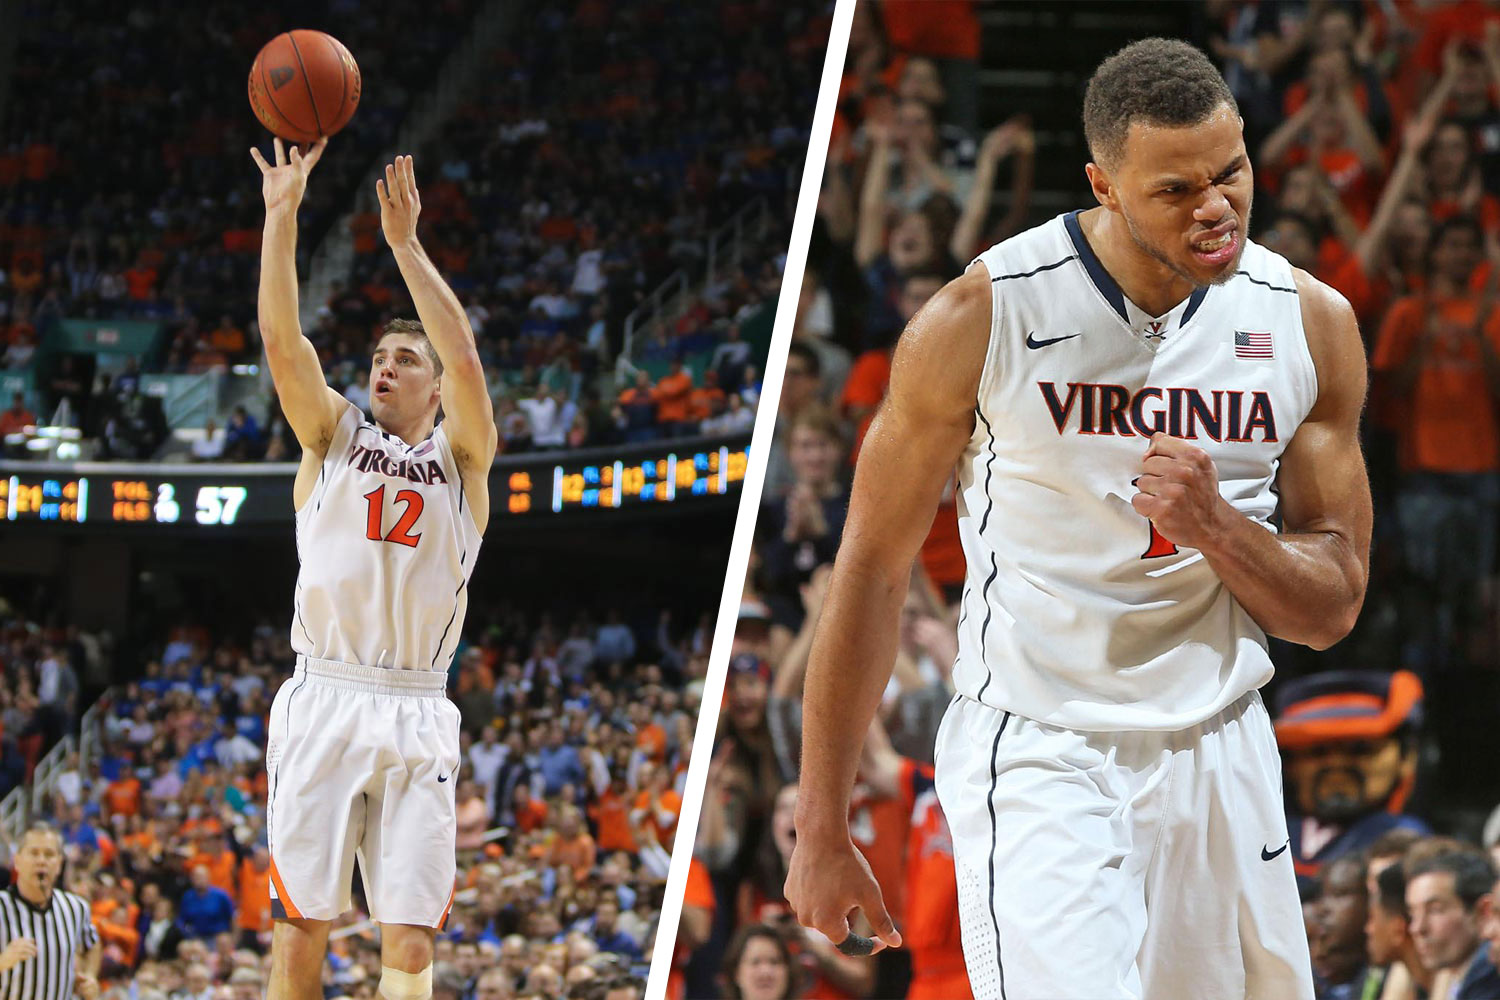 Left: Joe Harris, shooting the basketball during a game. Right: Justin Anderson celebrates after a shot